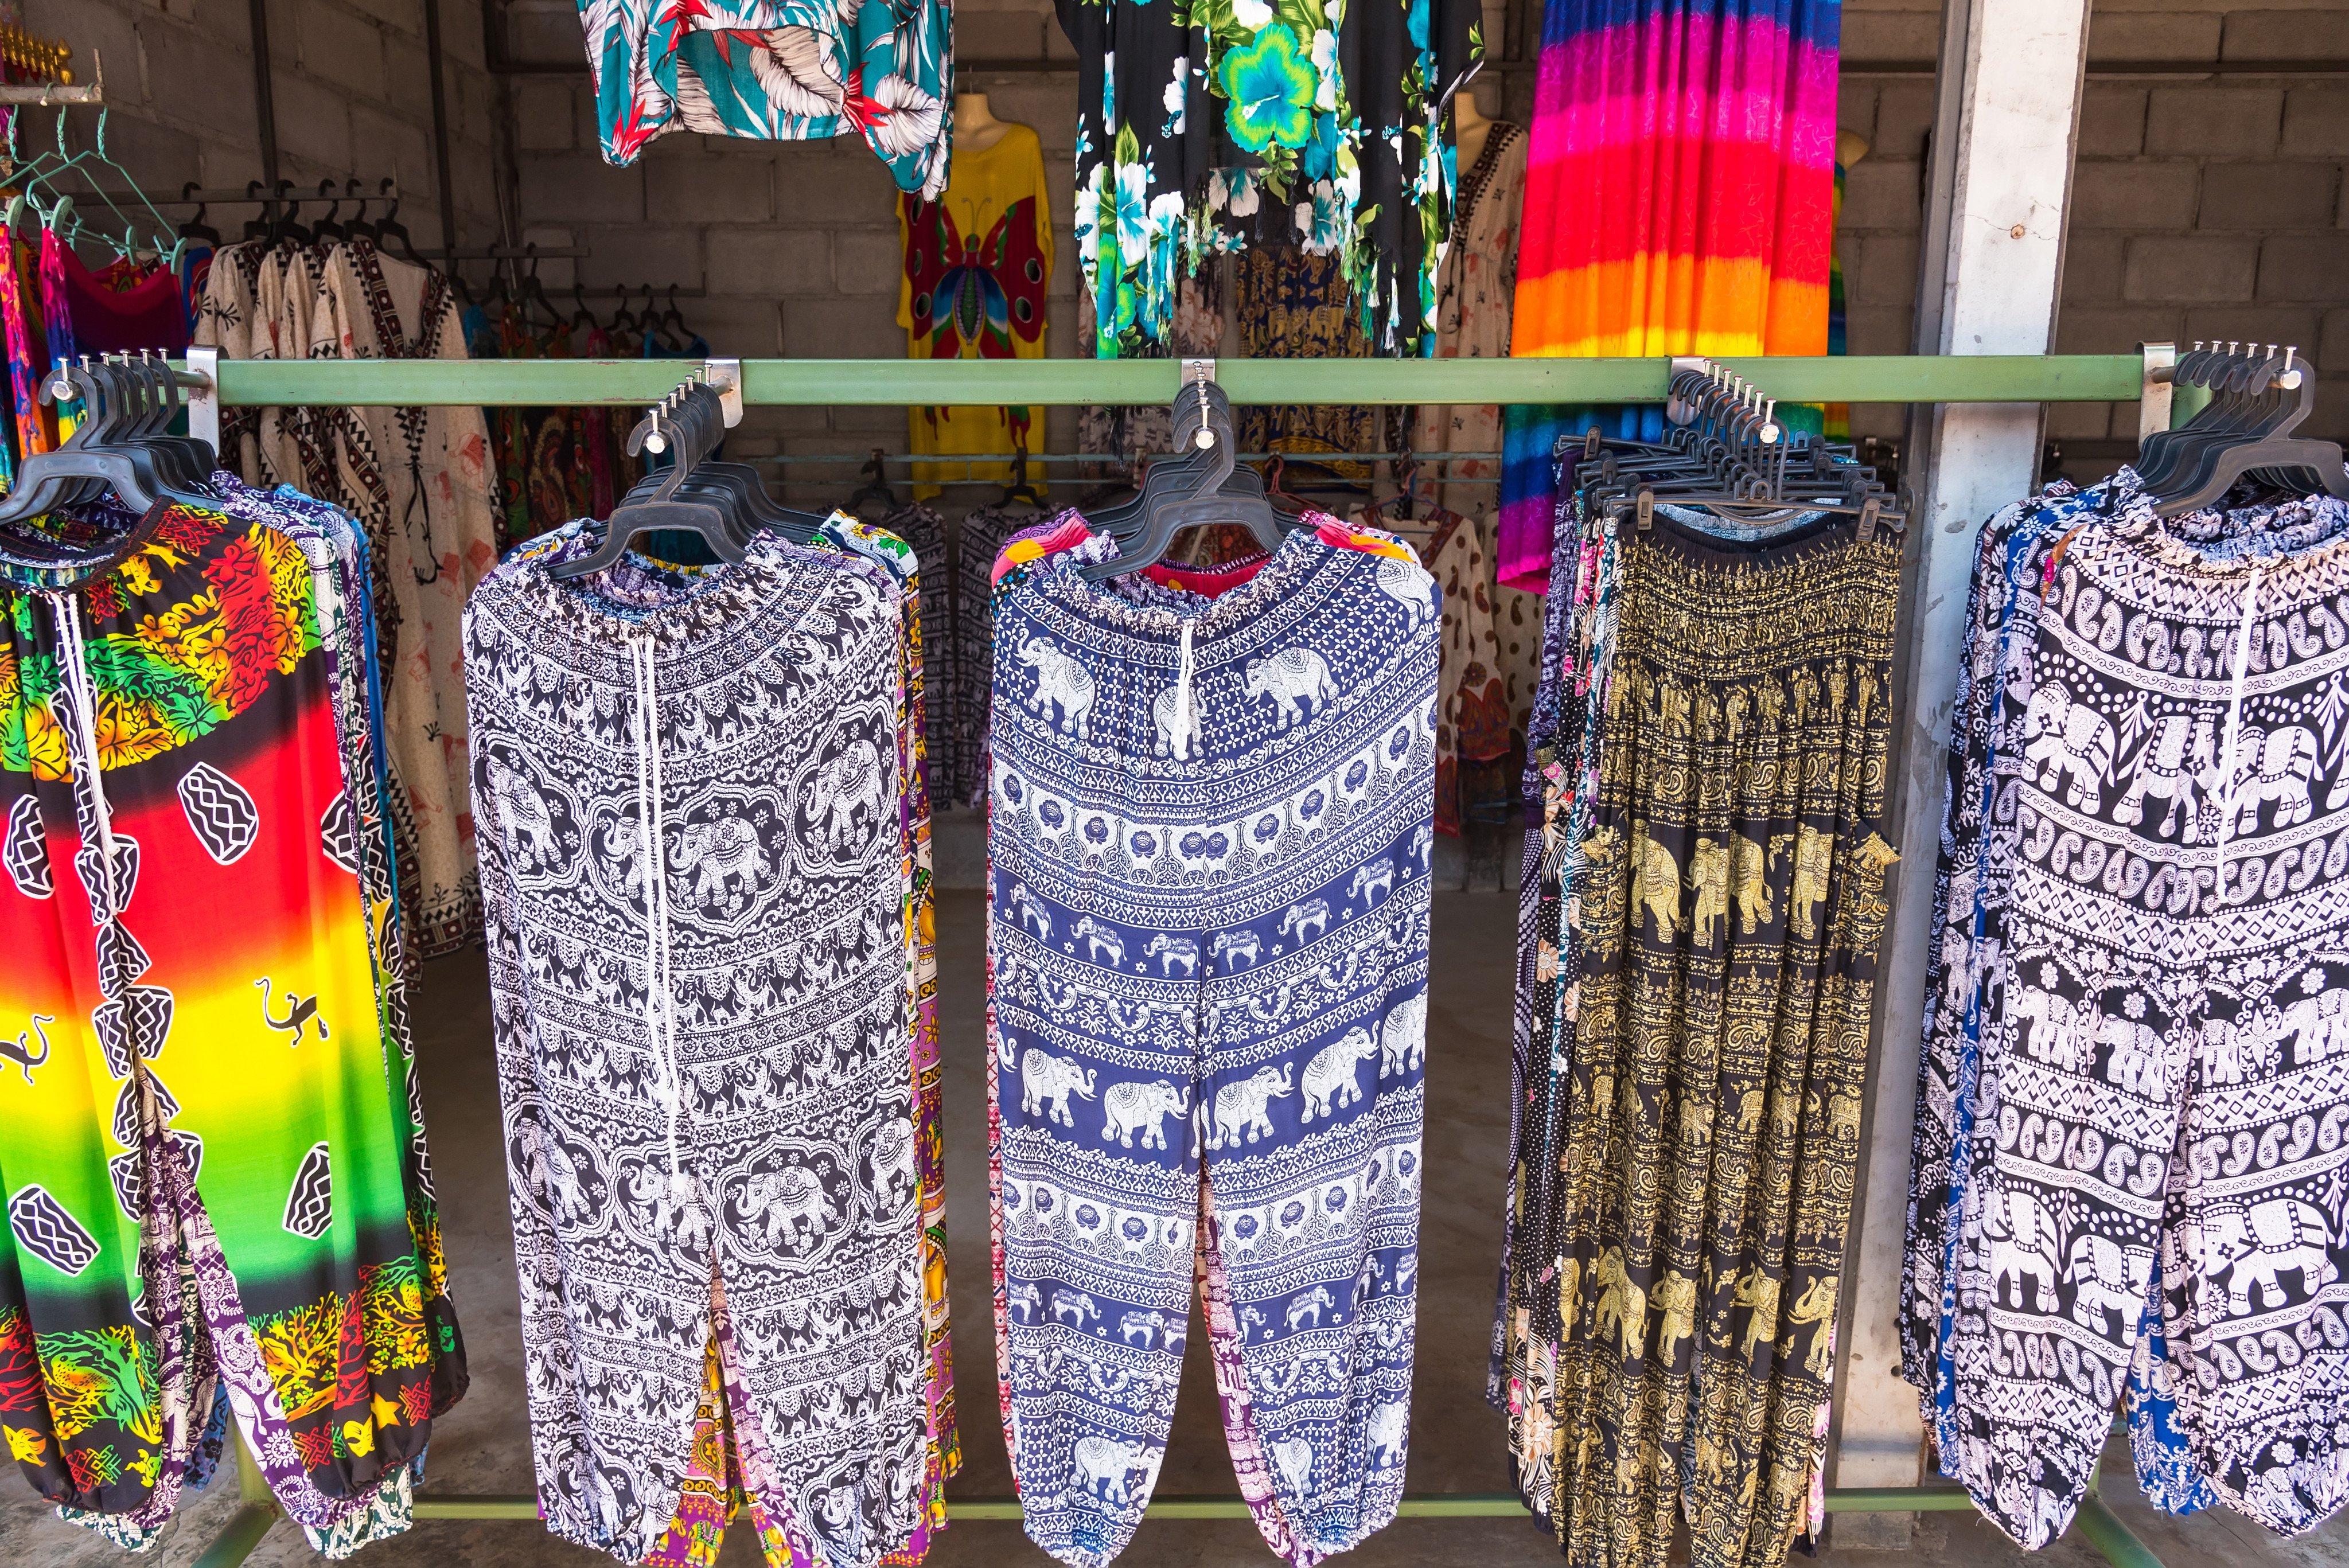 Pants with printed elephant patterns at a shop in Kanchanaburii, Thailand. Photo: Shutterstock 